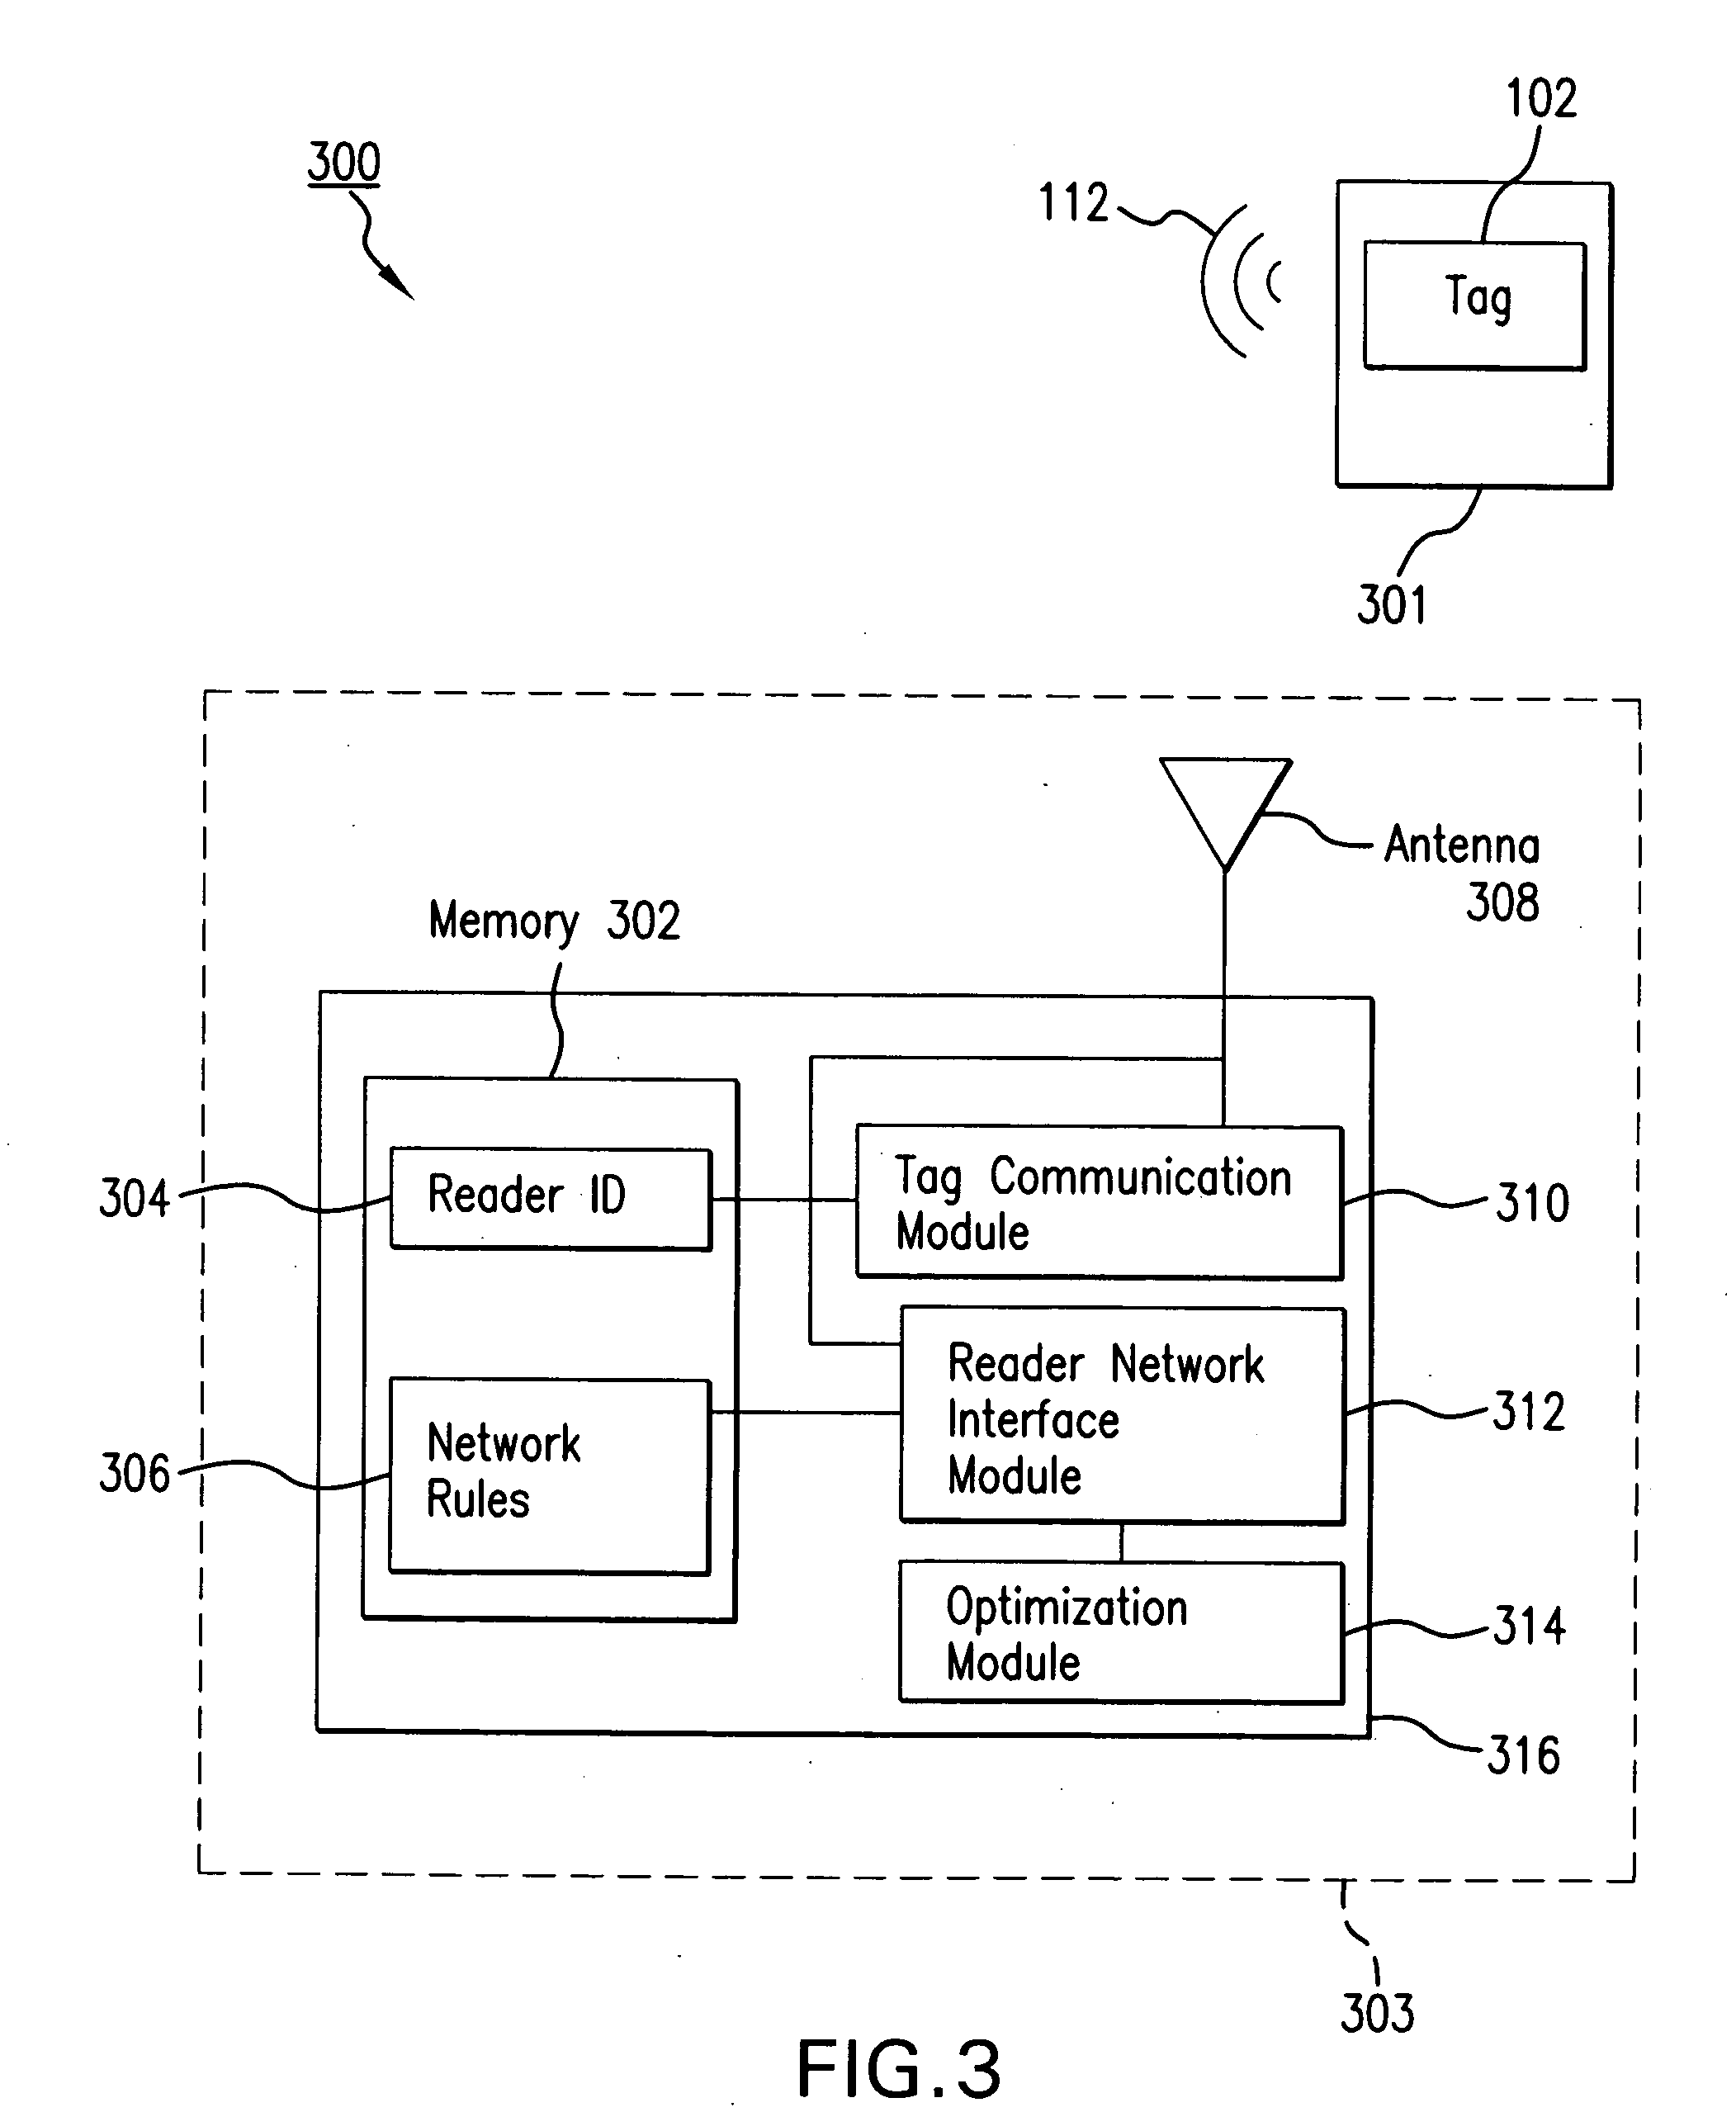 Optimized operation of a dense reader system